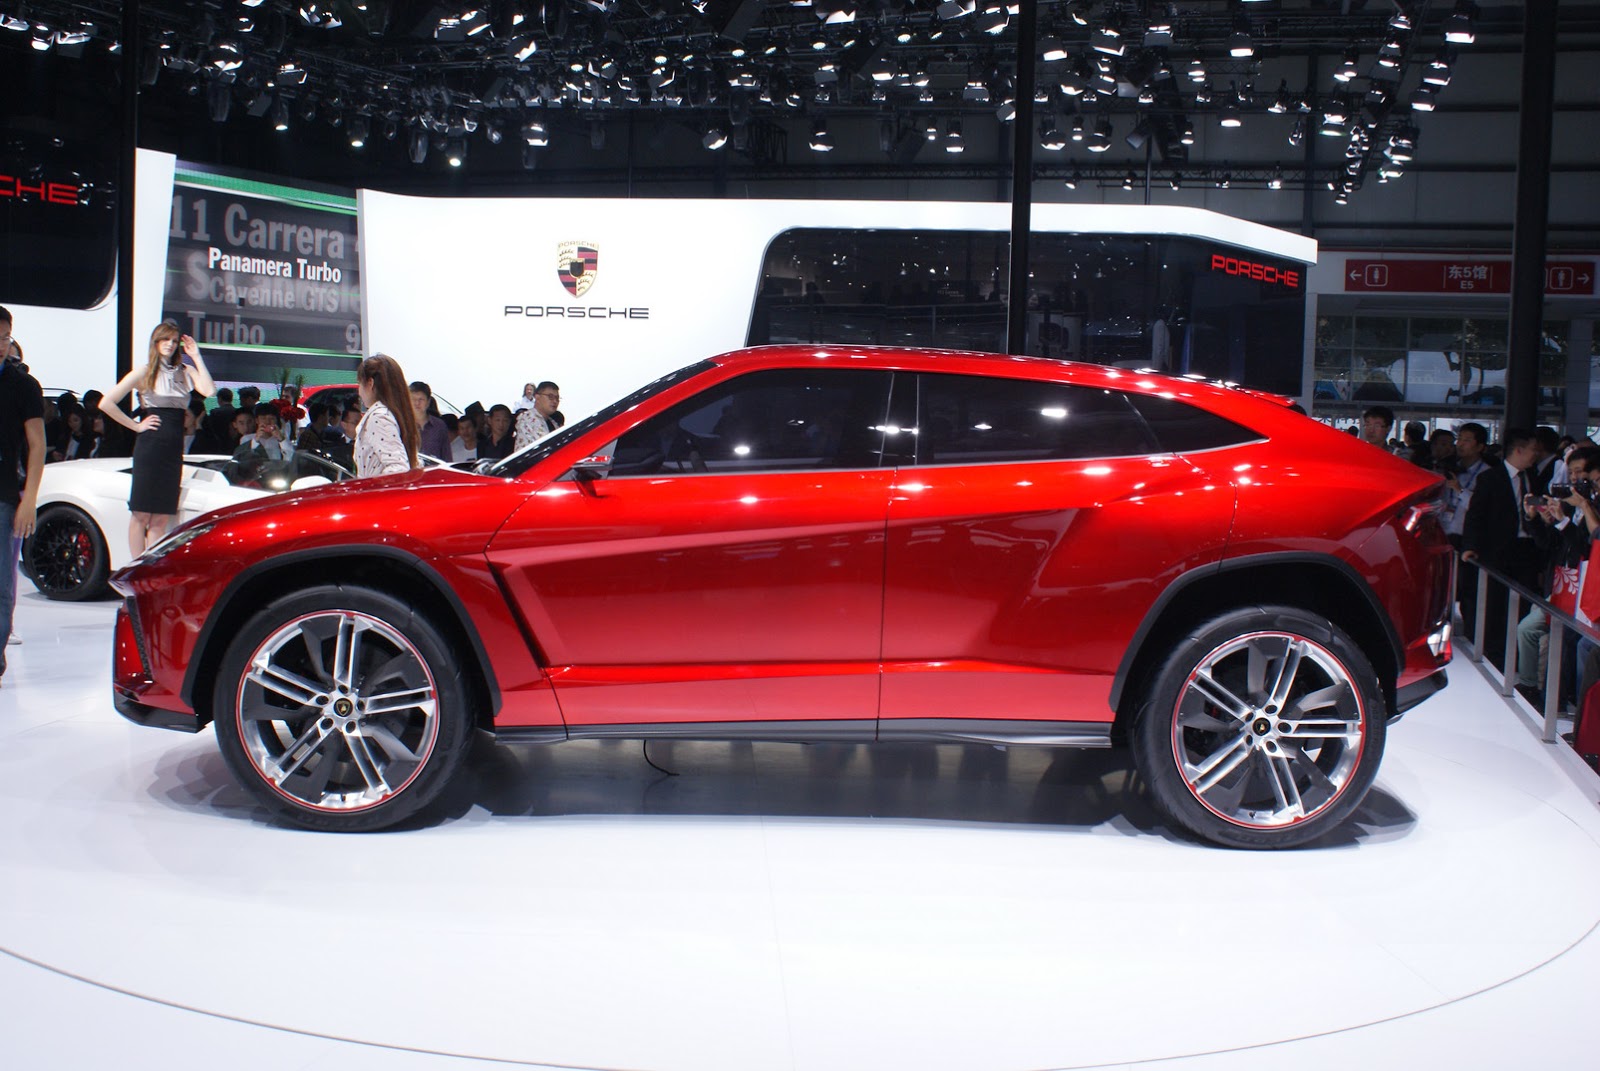 It's Official: Lamborghini's SUV Coming In 2018, Will Be ...